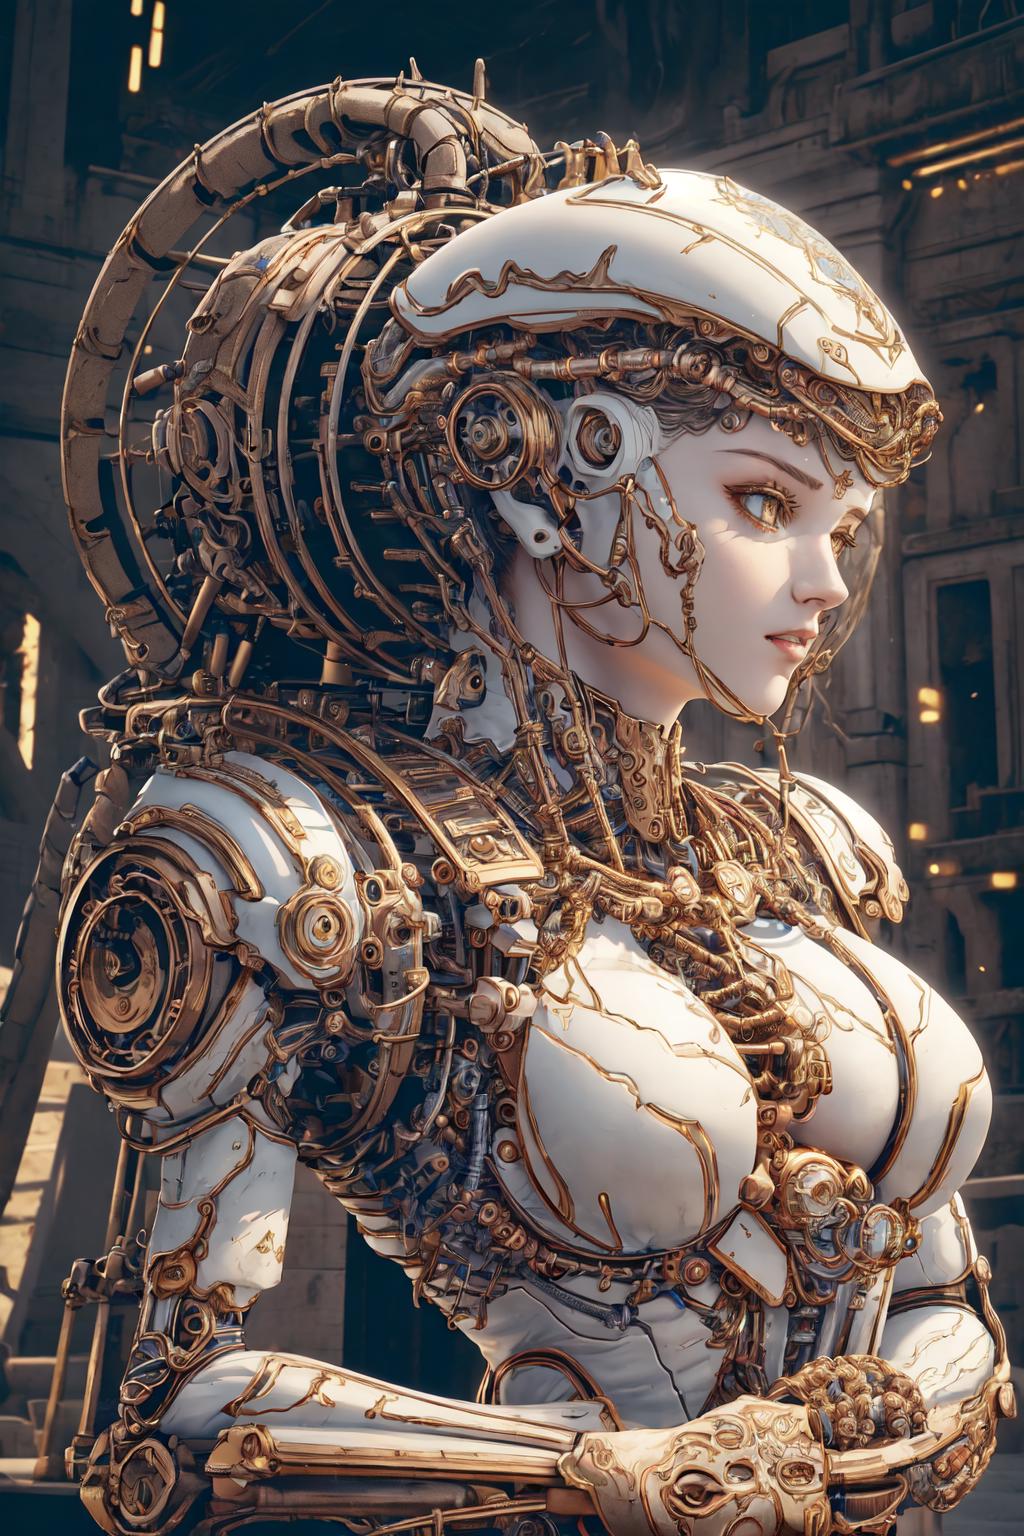 AI model image by _GhostInShell_